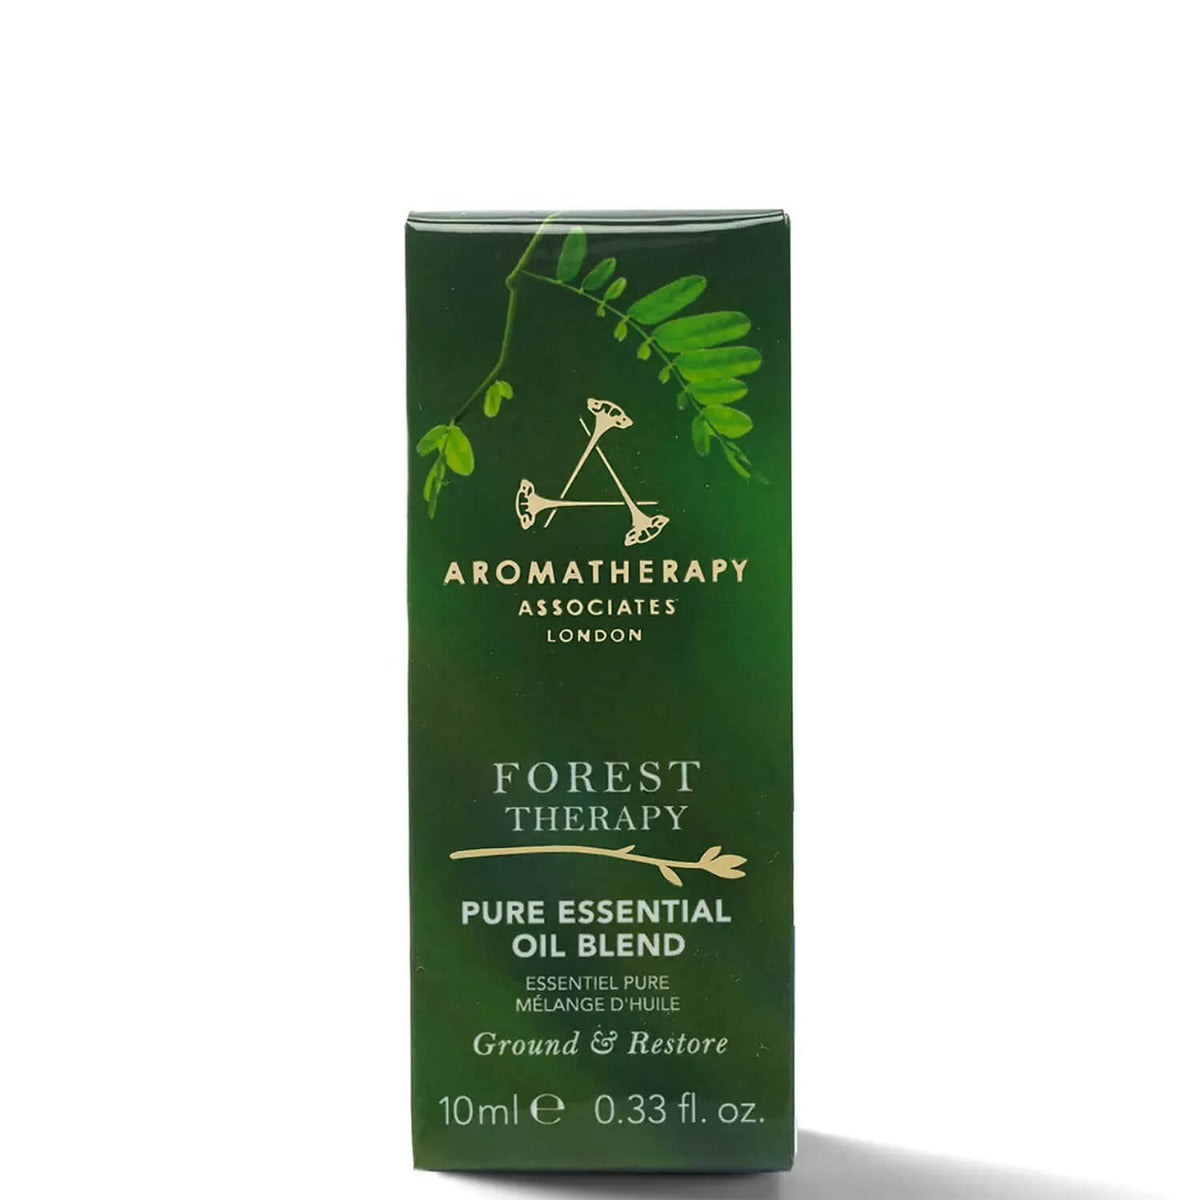 Aromatherapy Associates Forest Therapy Pure Essential Oil Blend